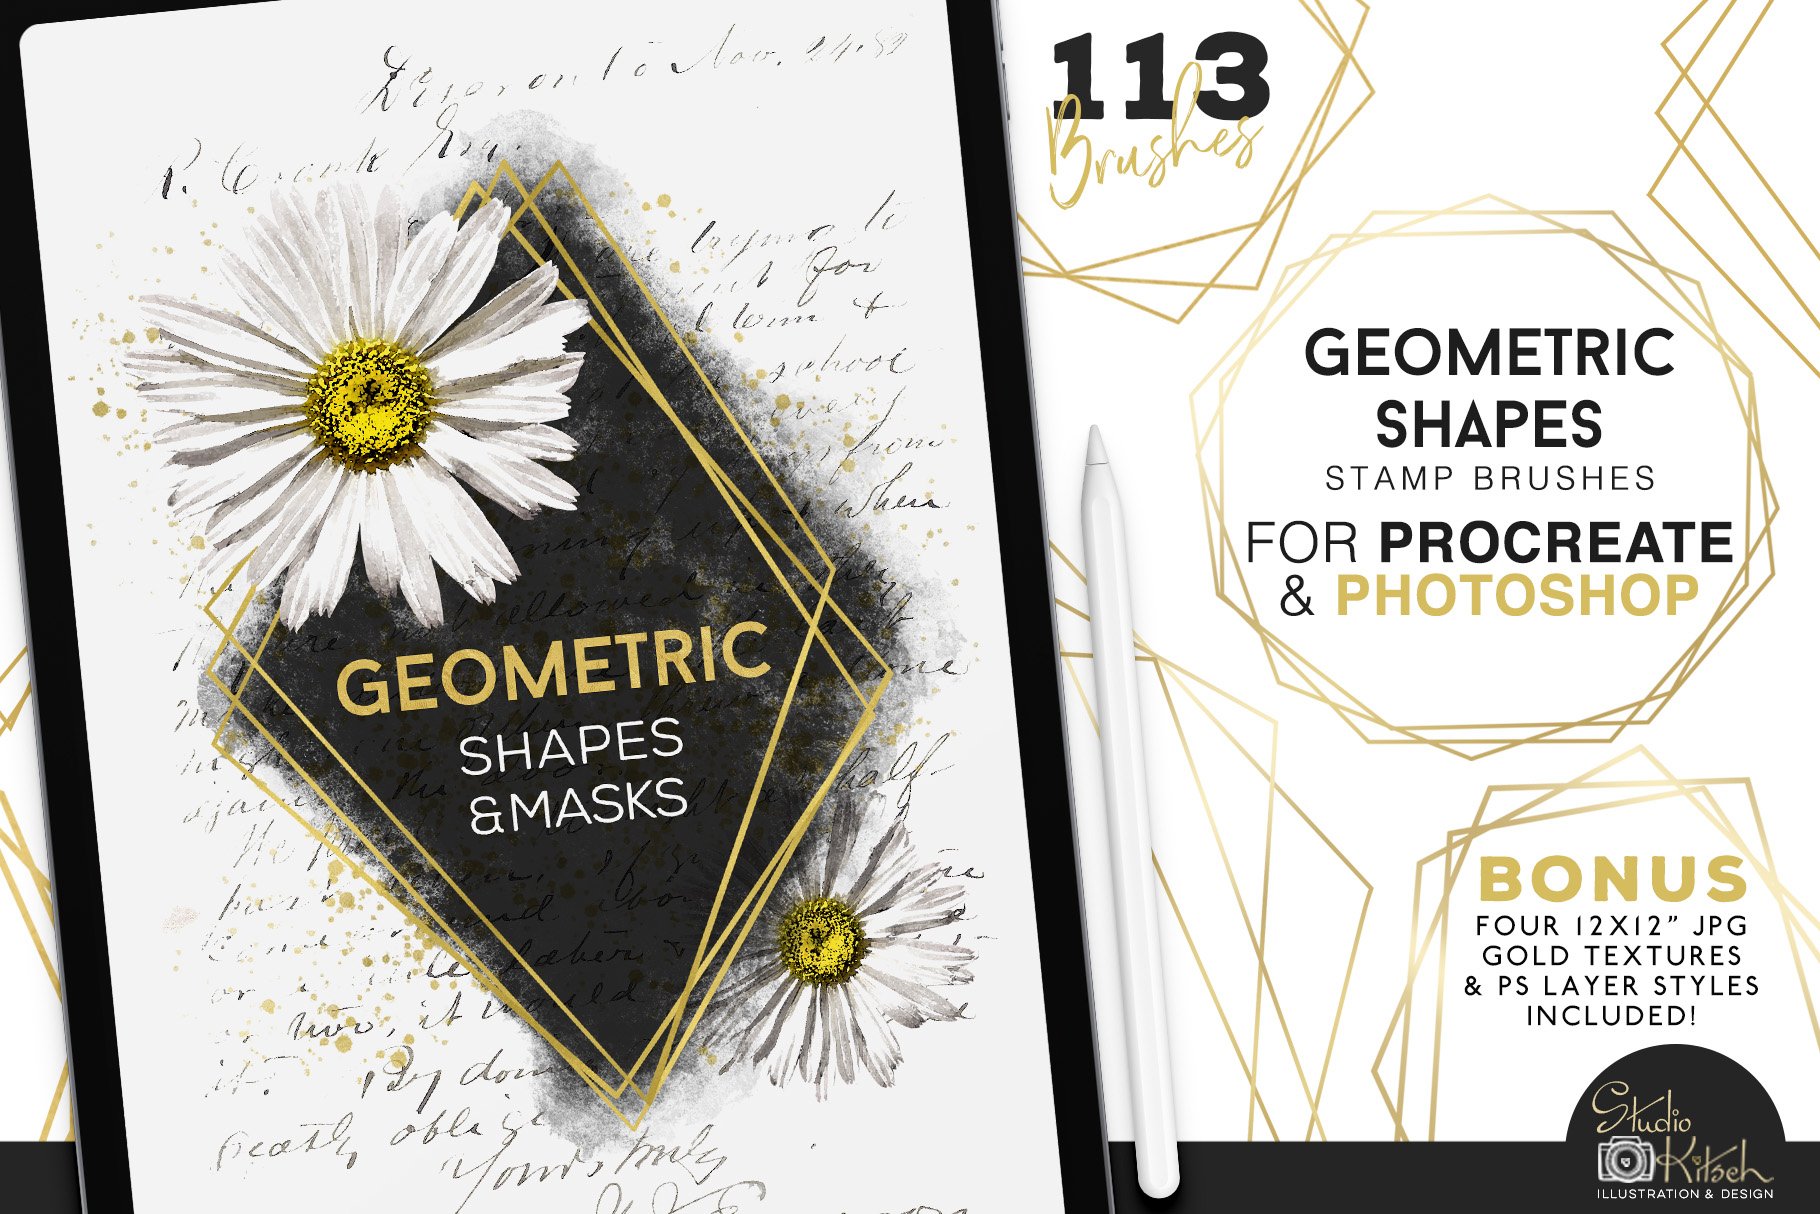 Geometric Shapes for Procreate & PScover image.